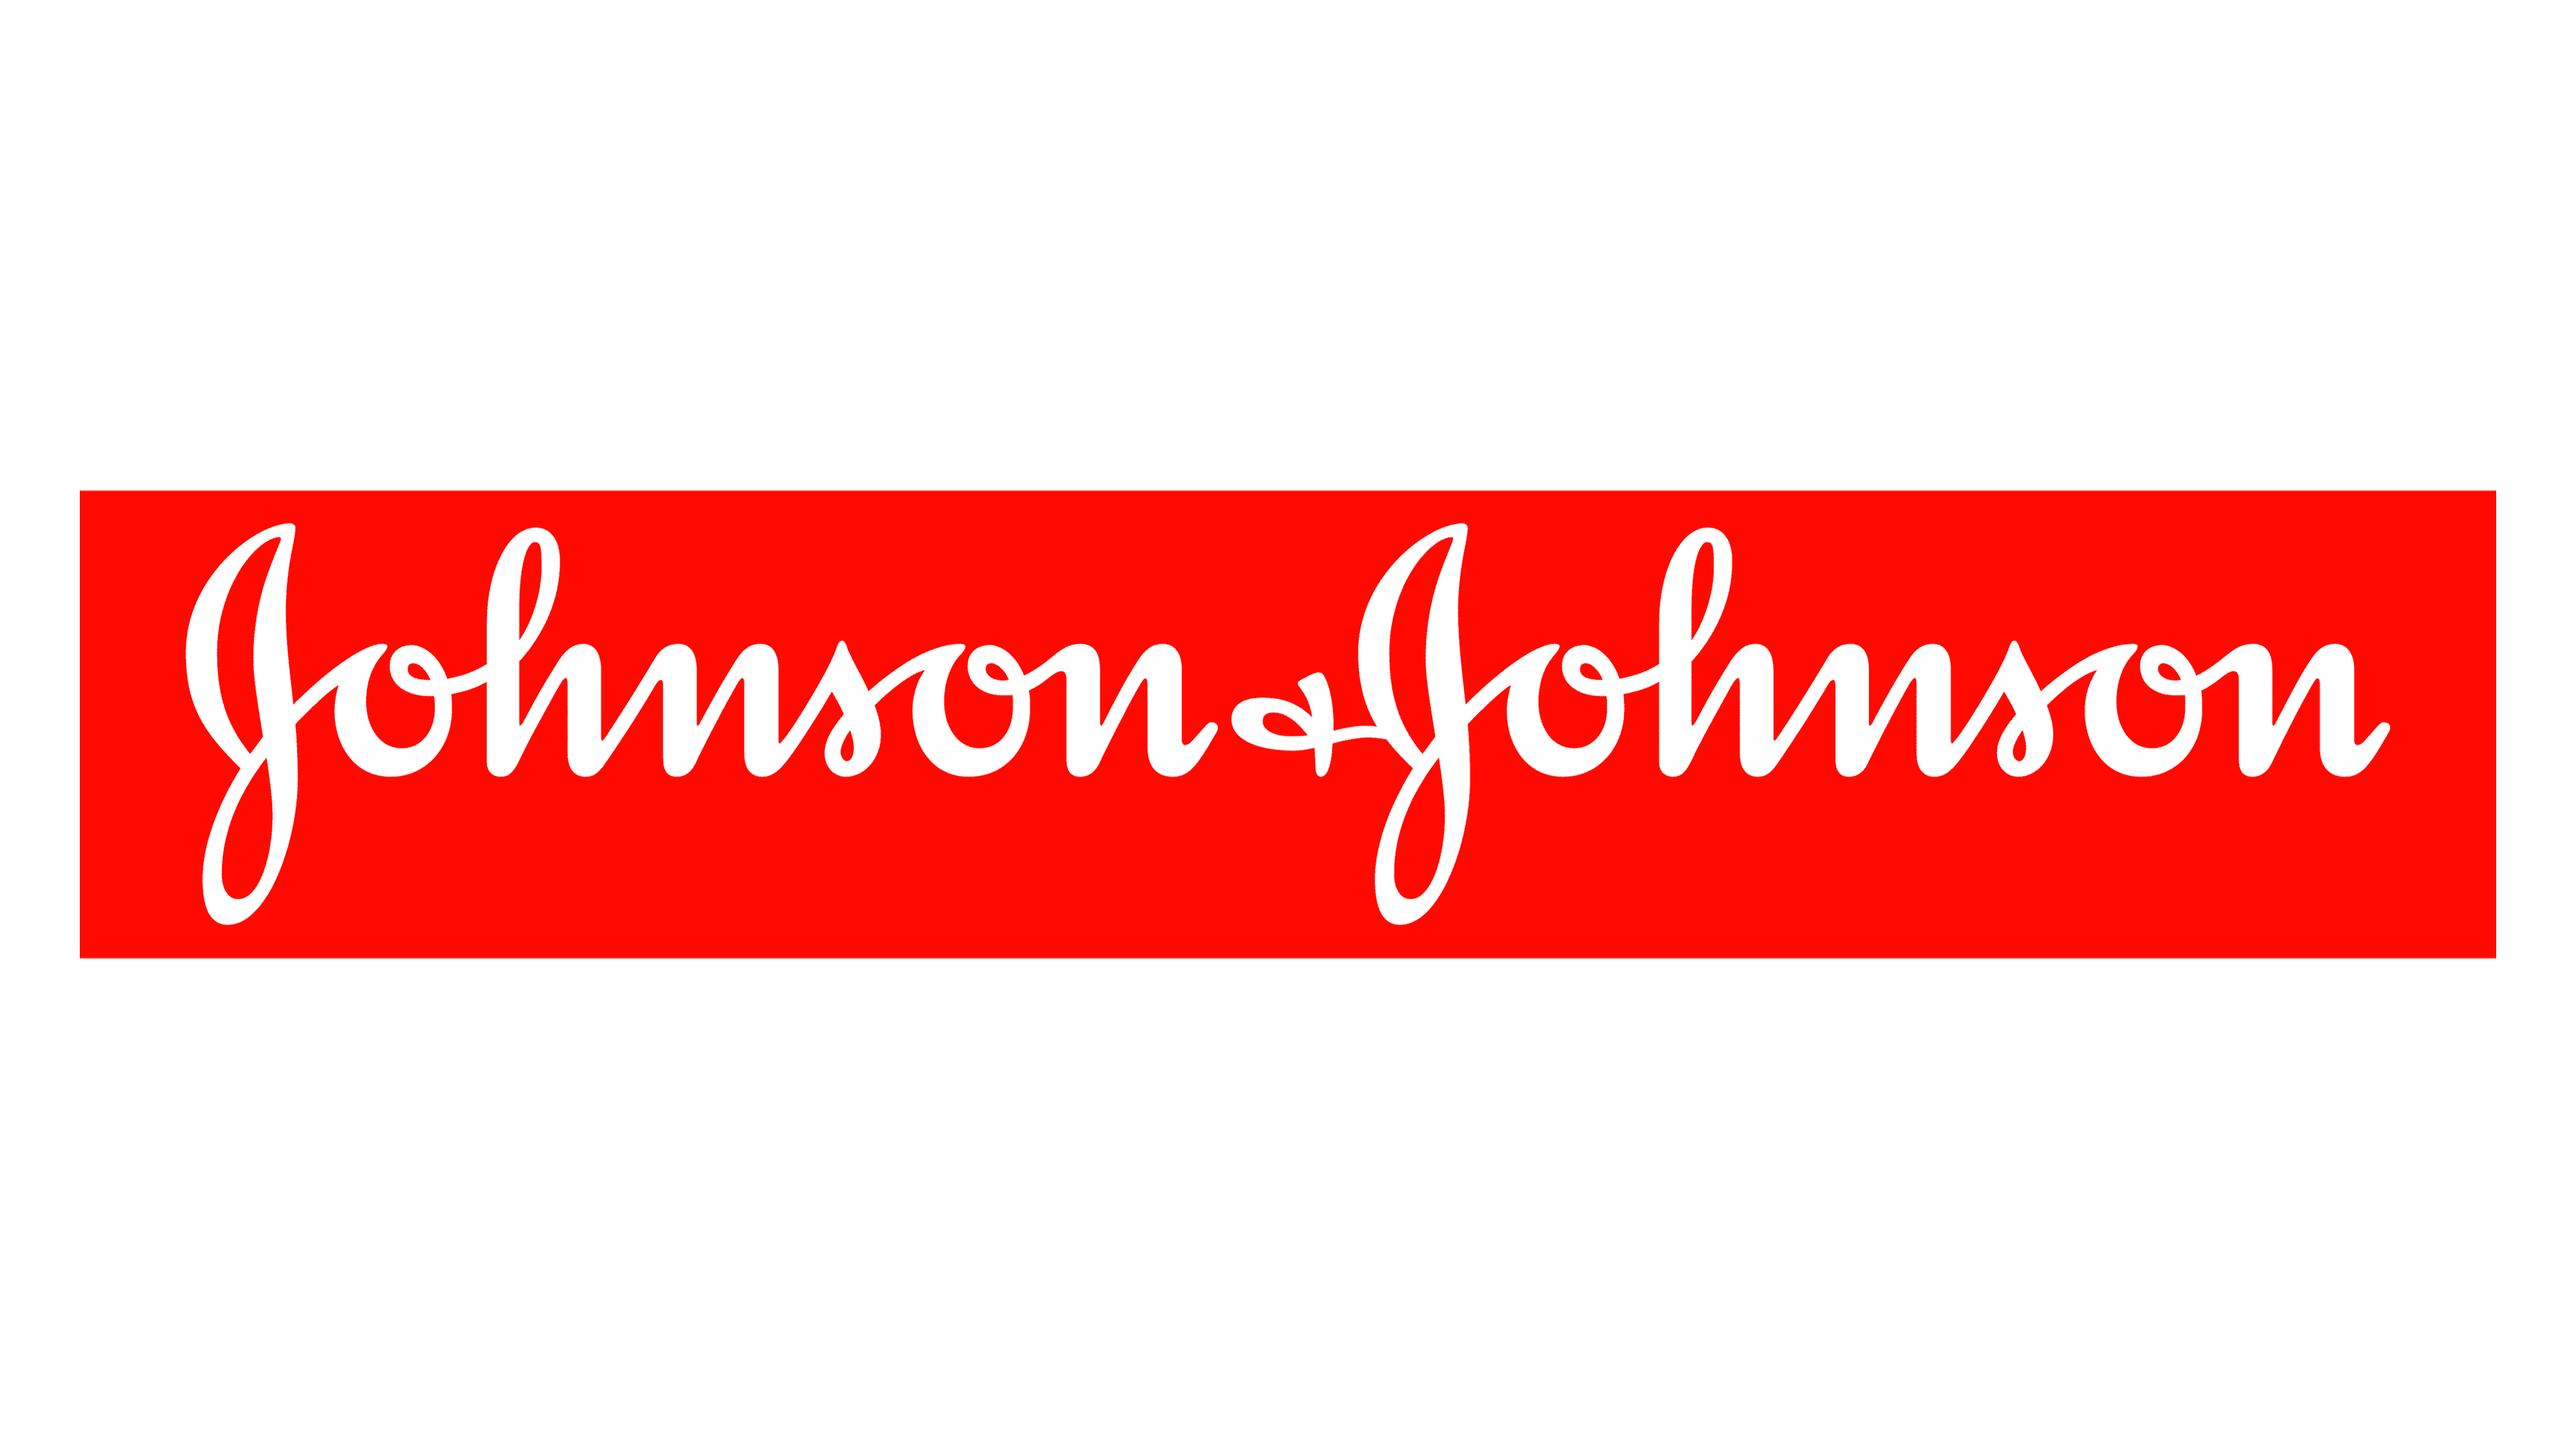 Johnson & Johnson Logo and sign, new logo meaning and history, PNG, SVG